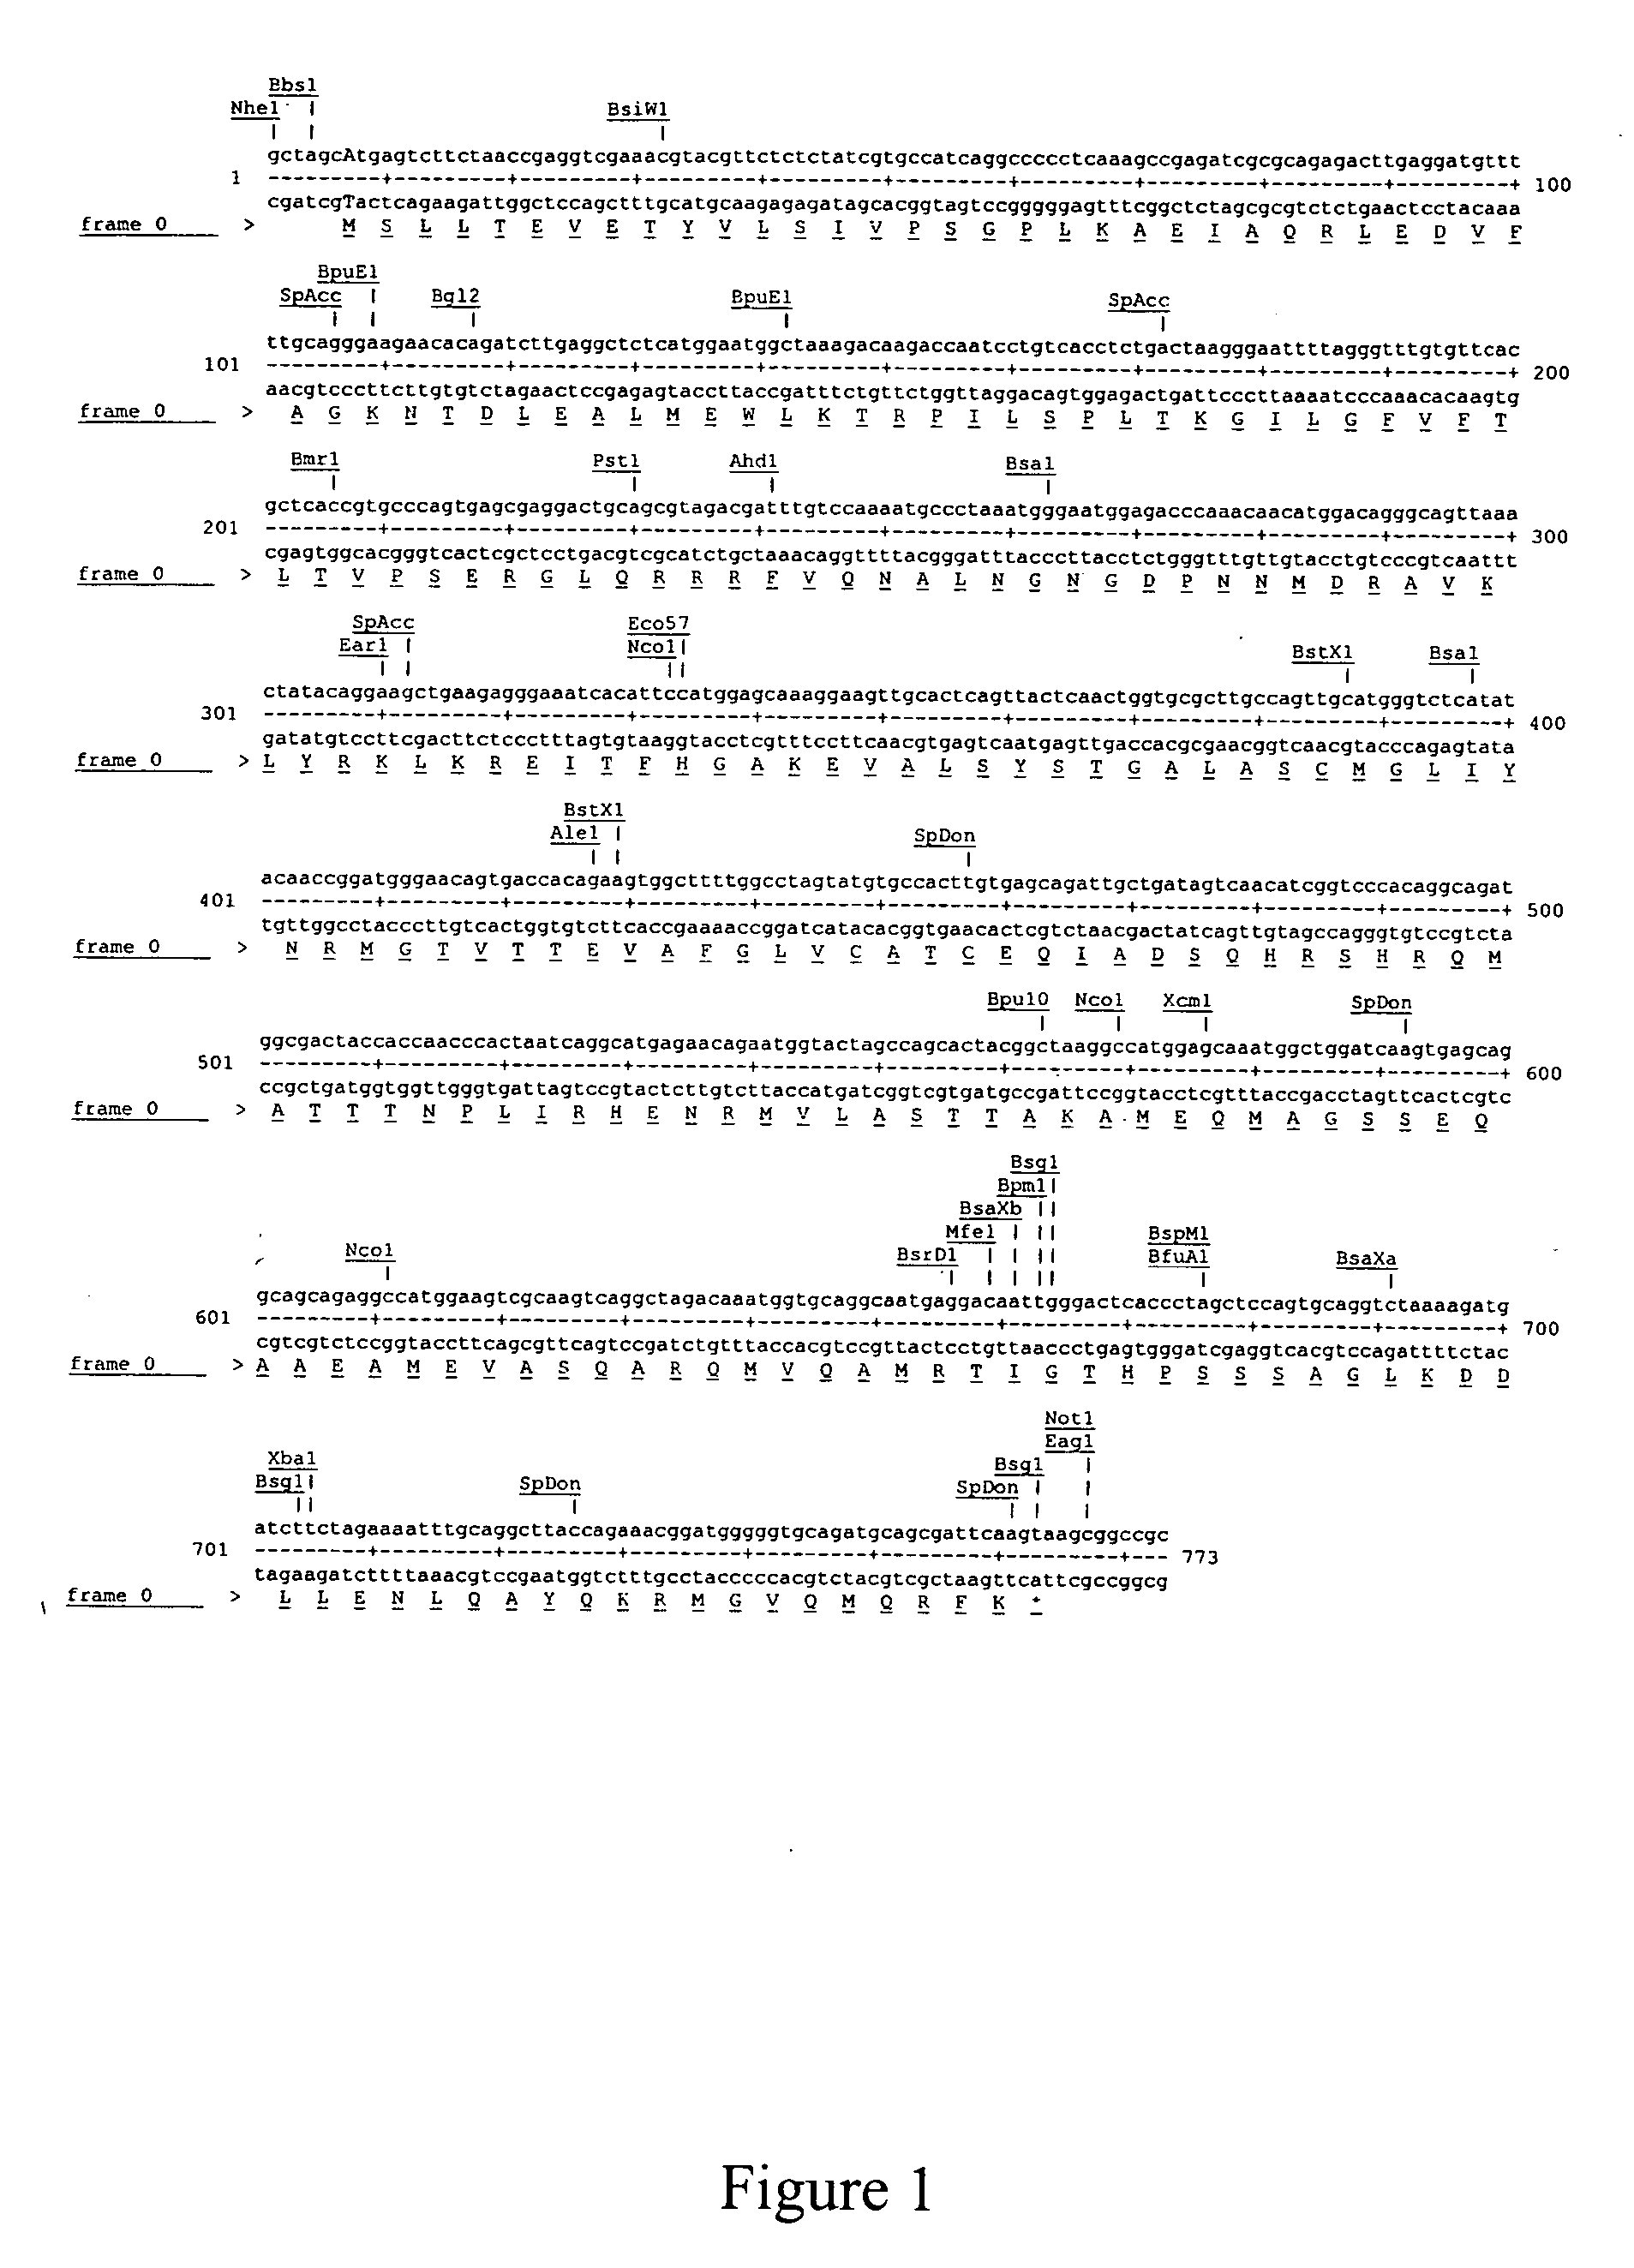 Immunotherapeutic compositions and methods